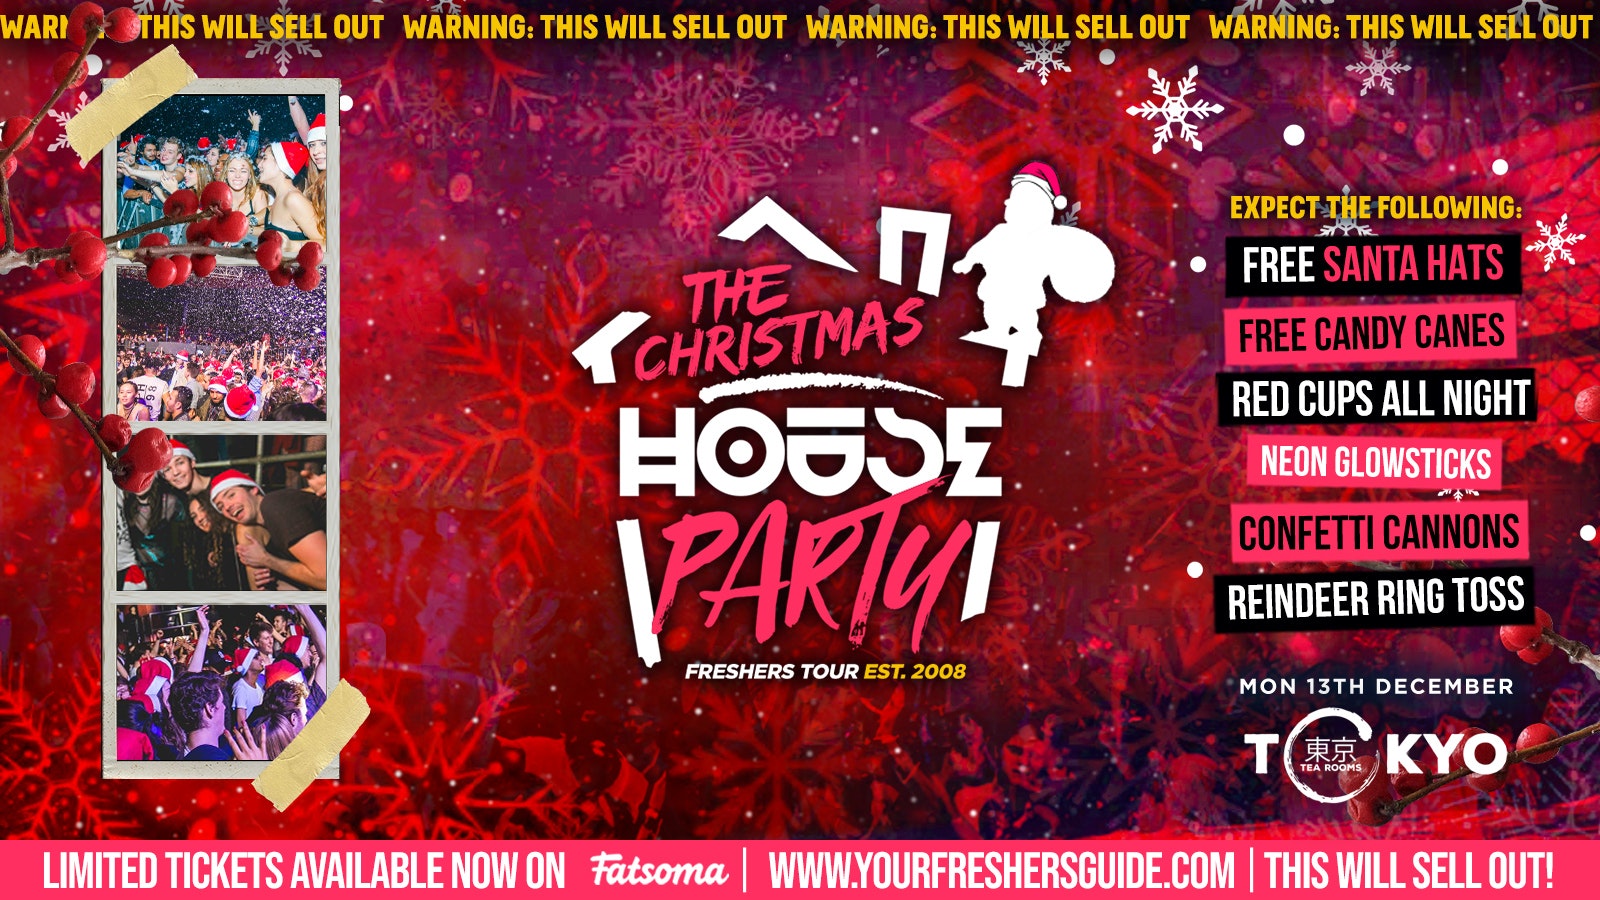 The XMAS House Party – End Of Term Party @ TOKYO TEA ROOMS | £3 Tickets for 24 HOURS ONLY!